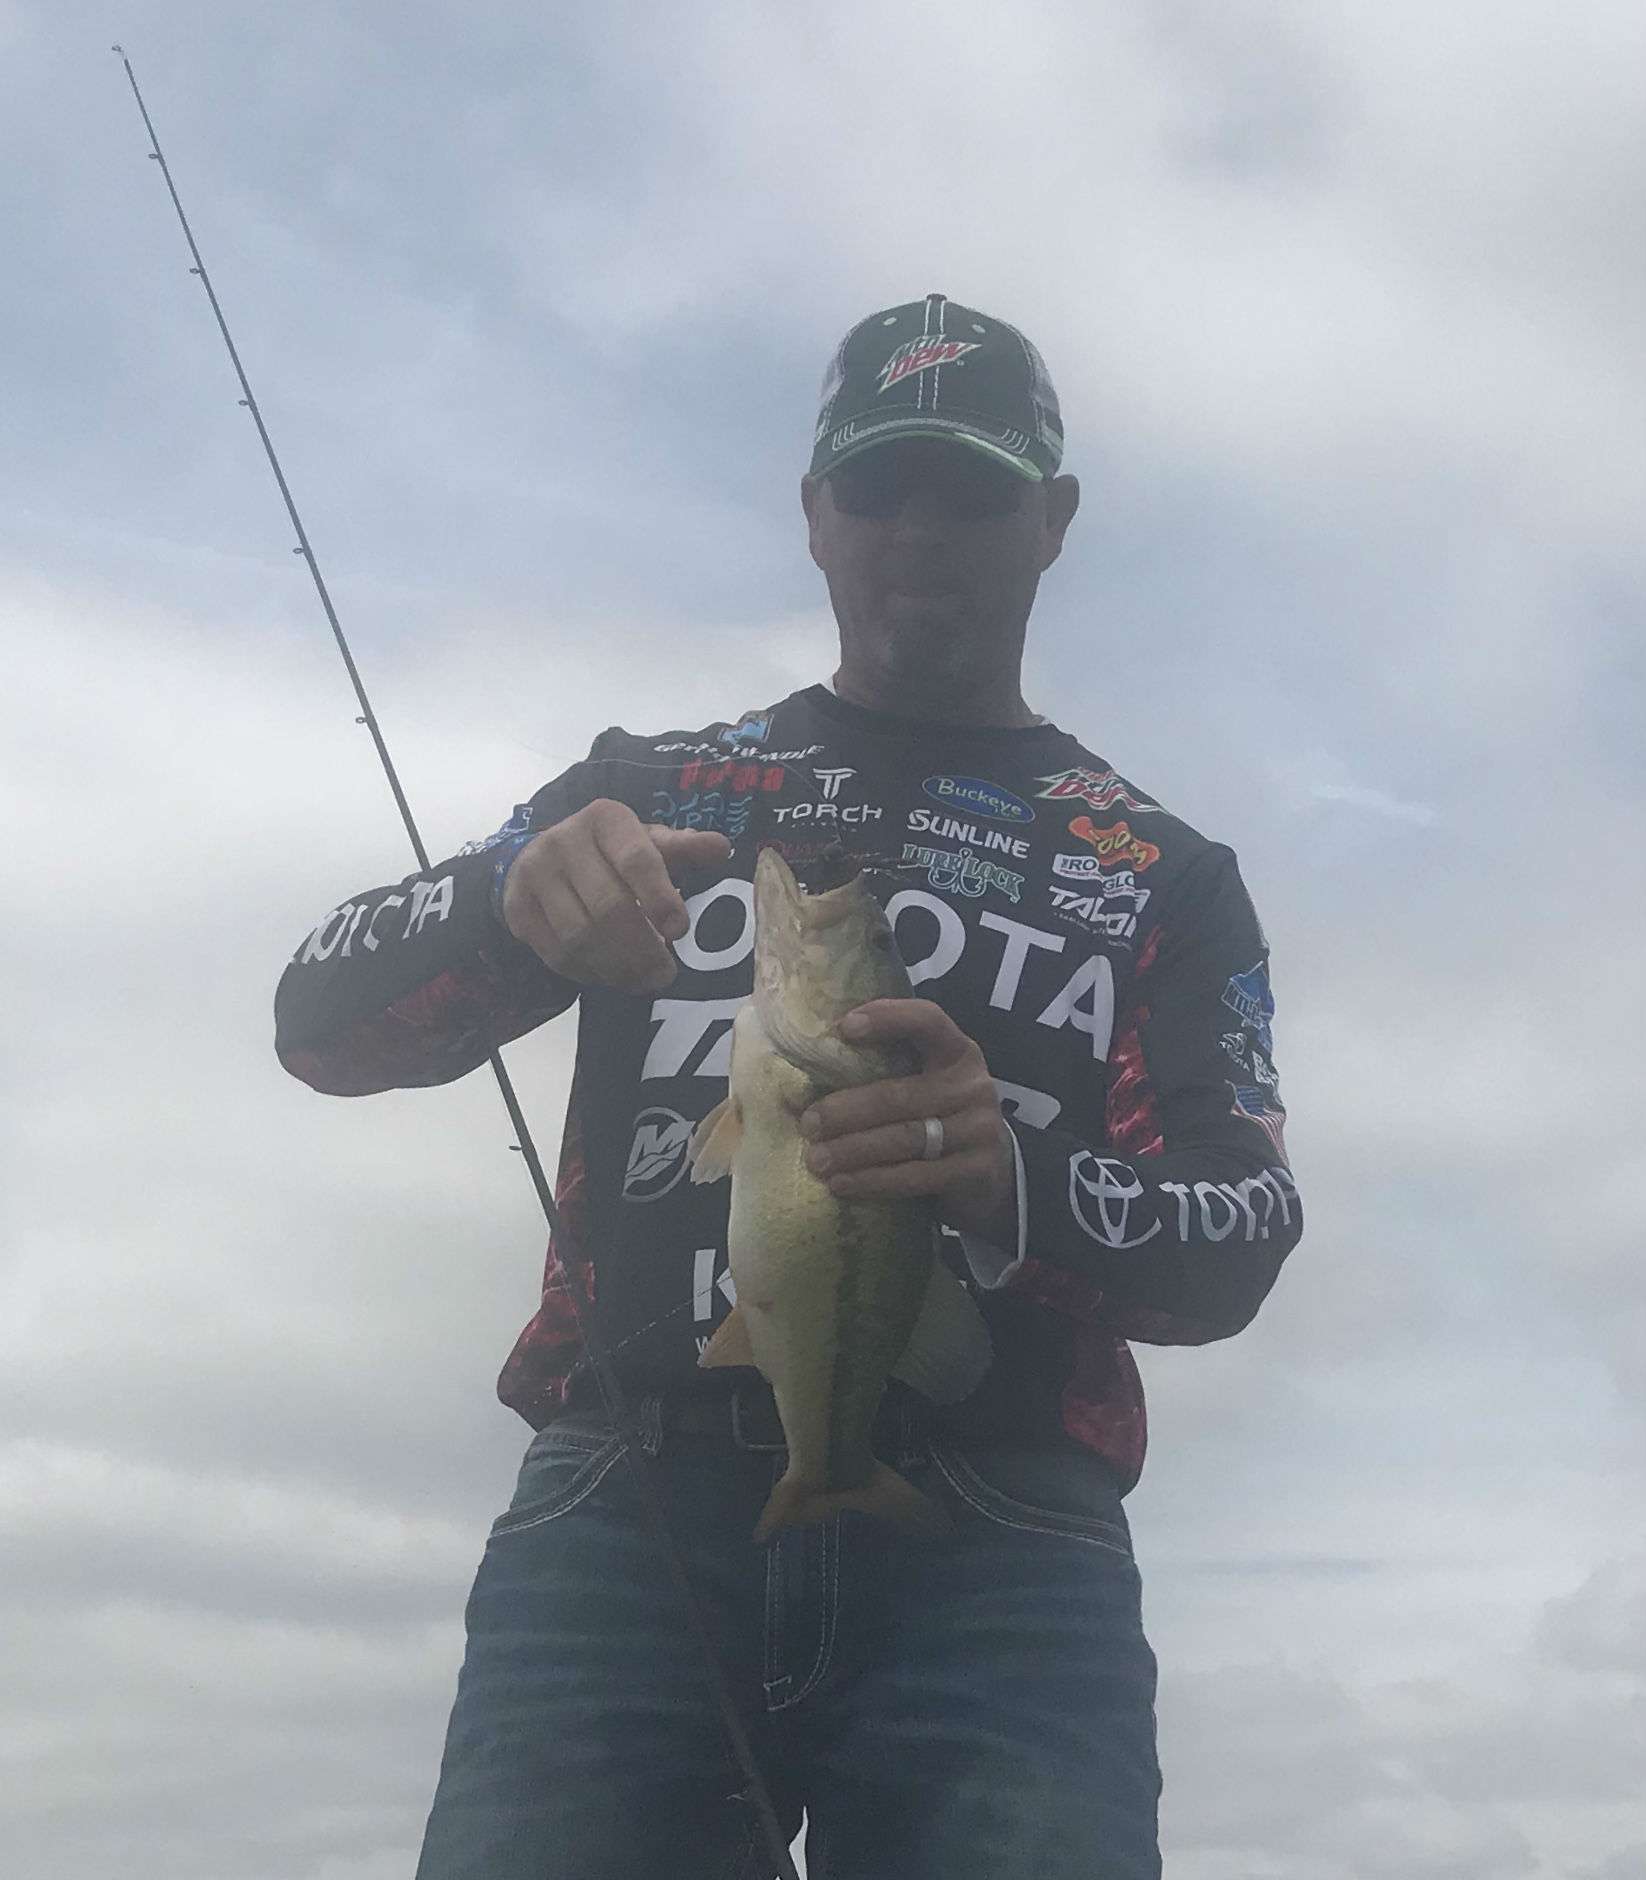 Swindle has continued to catch fish throughout the day on a slow but consistent basis. Unfortunately as evidenced by this 2 1/2-pounder, they arenât helping the overall weight. âBut it still feels good to get bites and blister âemâ says Gerald.